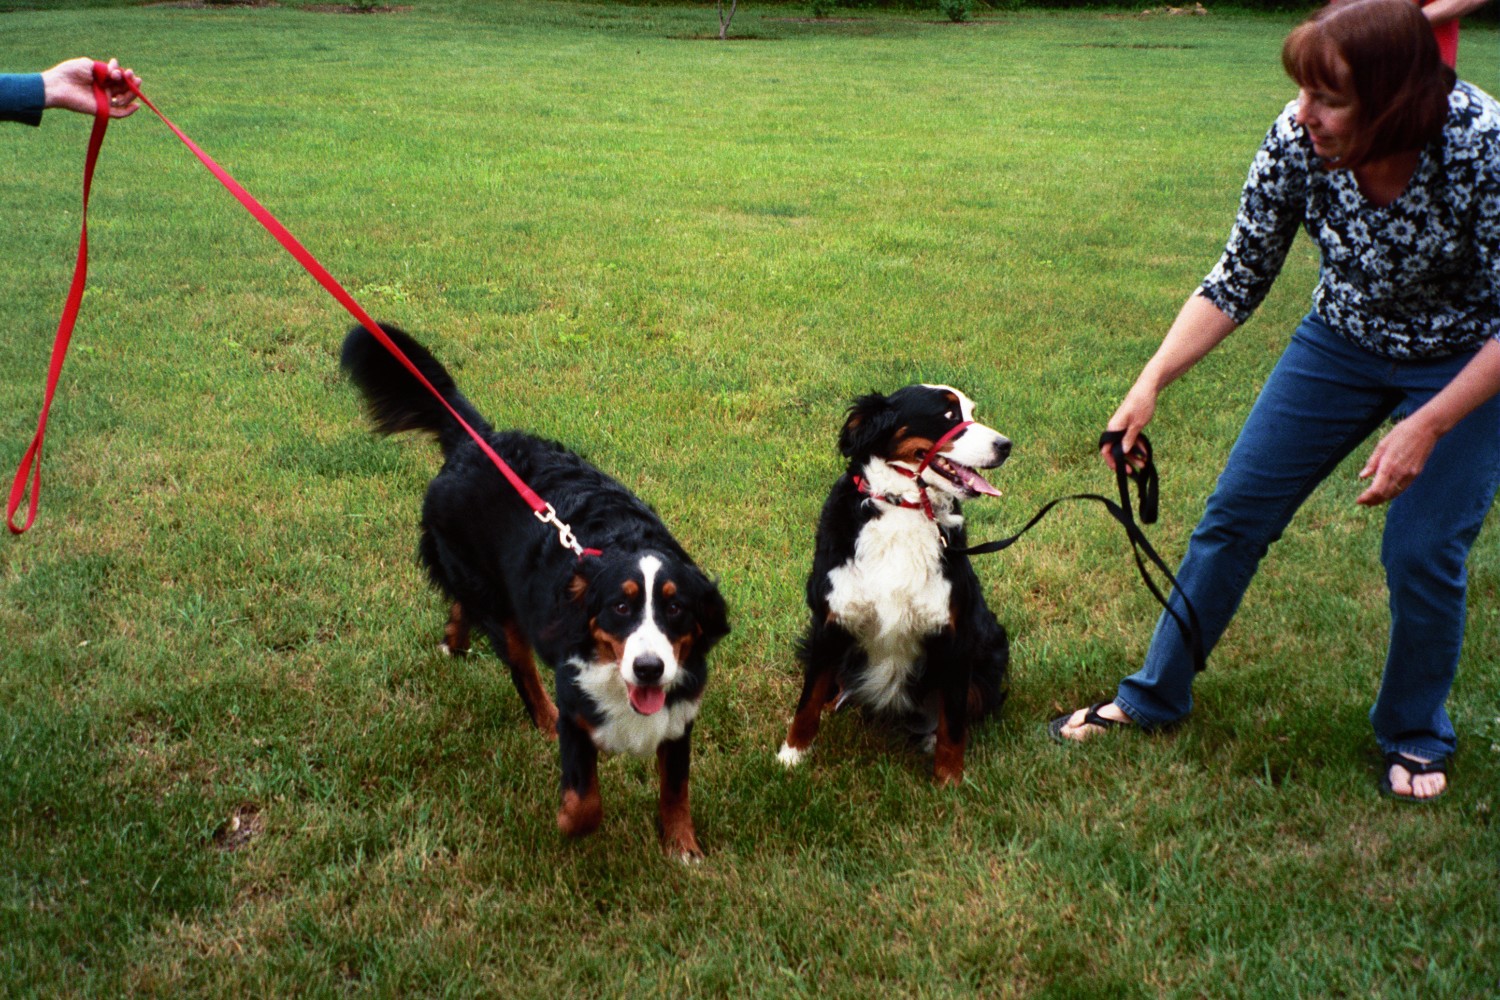 Bernese Mountain Dogs
Emma and her Mom Ellie
